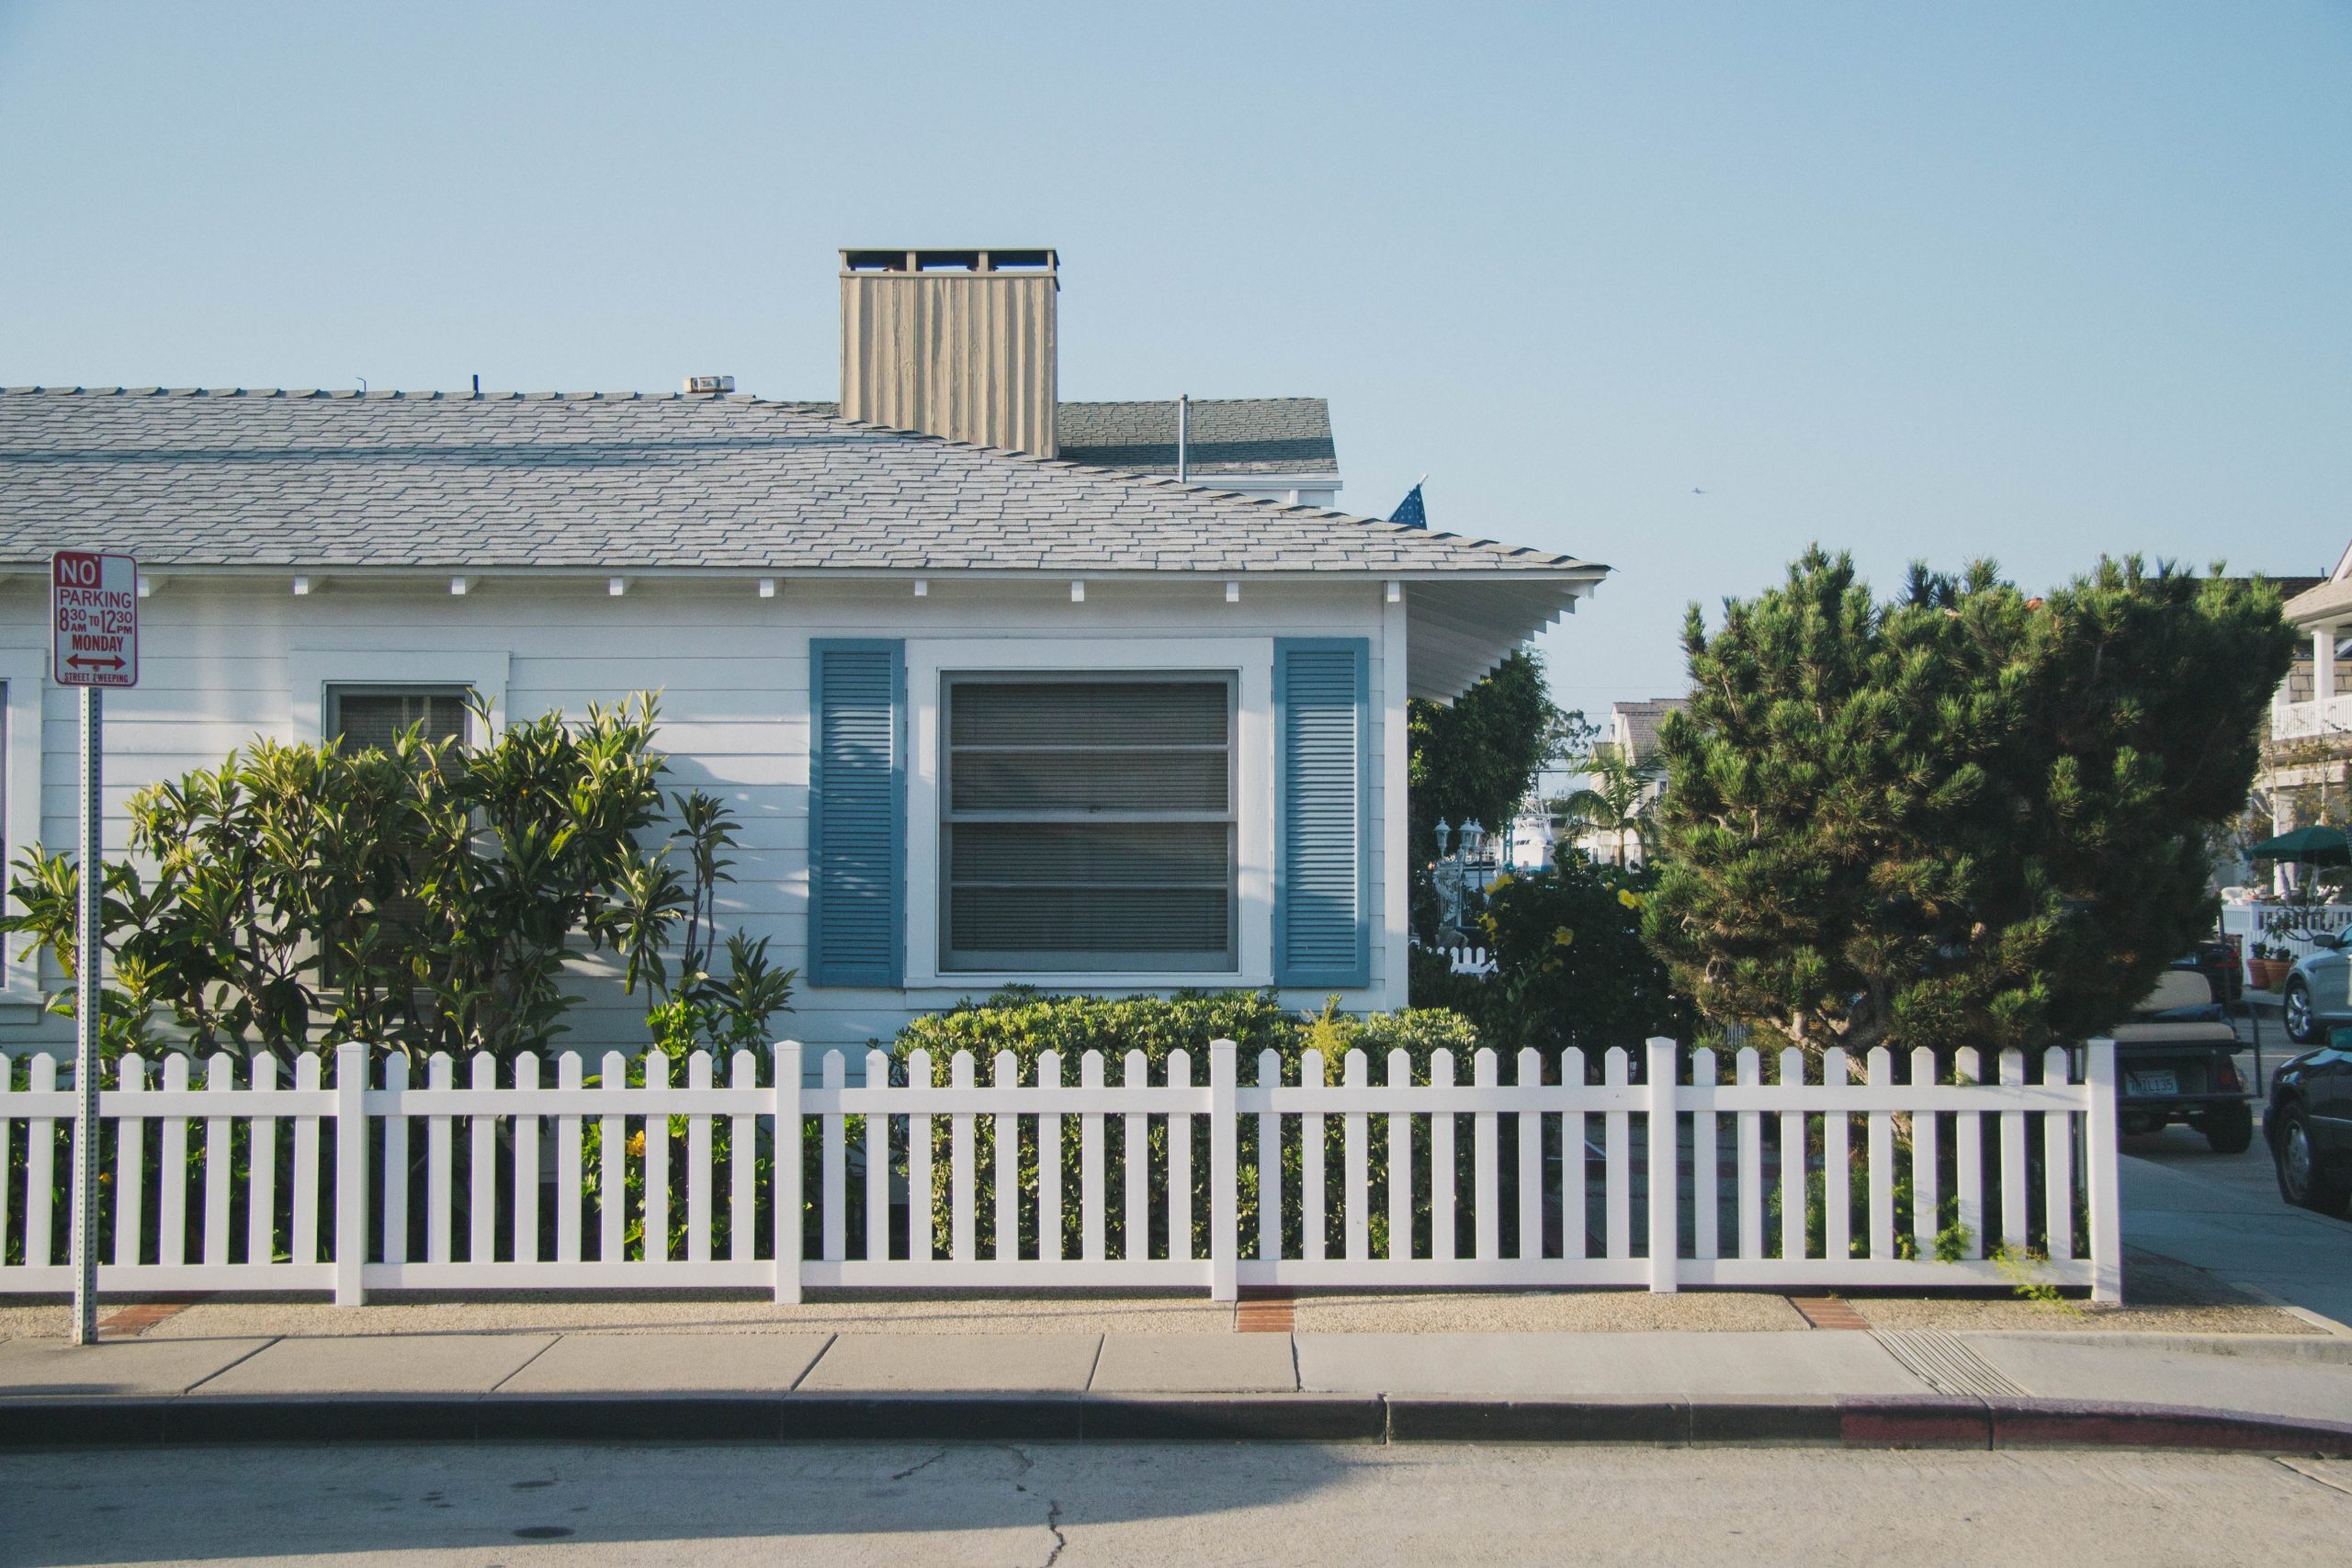 A white picket fence in front of a house.